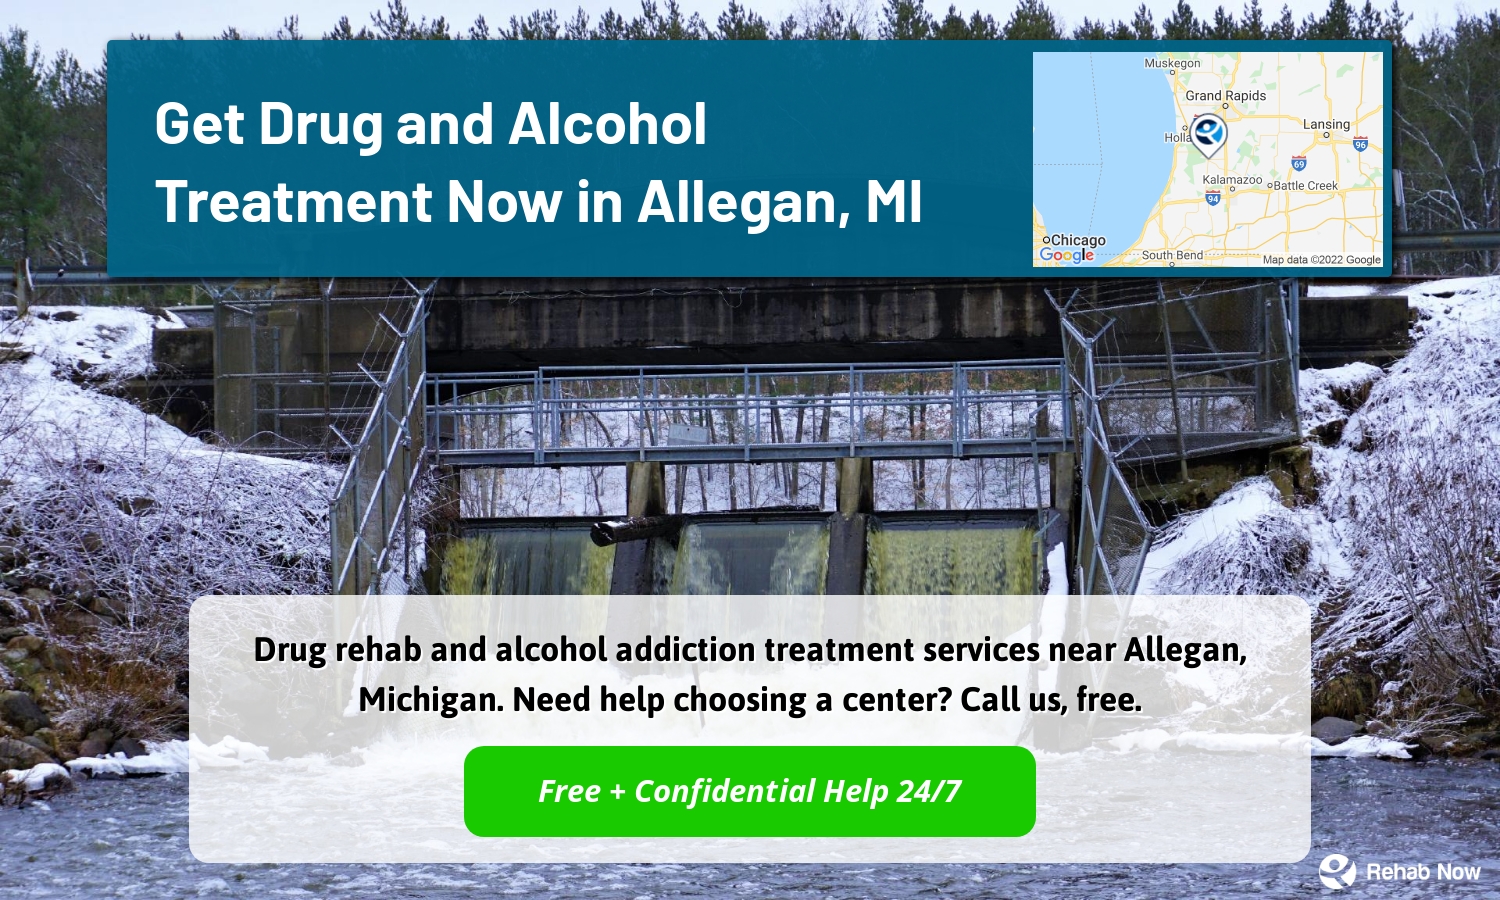 Drug rehab and alcohol addiction treatment services near Allegan, Michigan. Need help choosing a center? Call us, free.